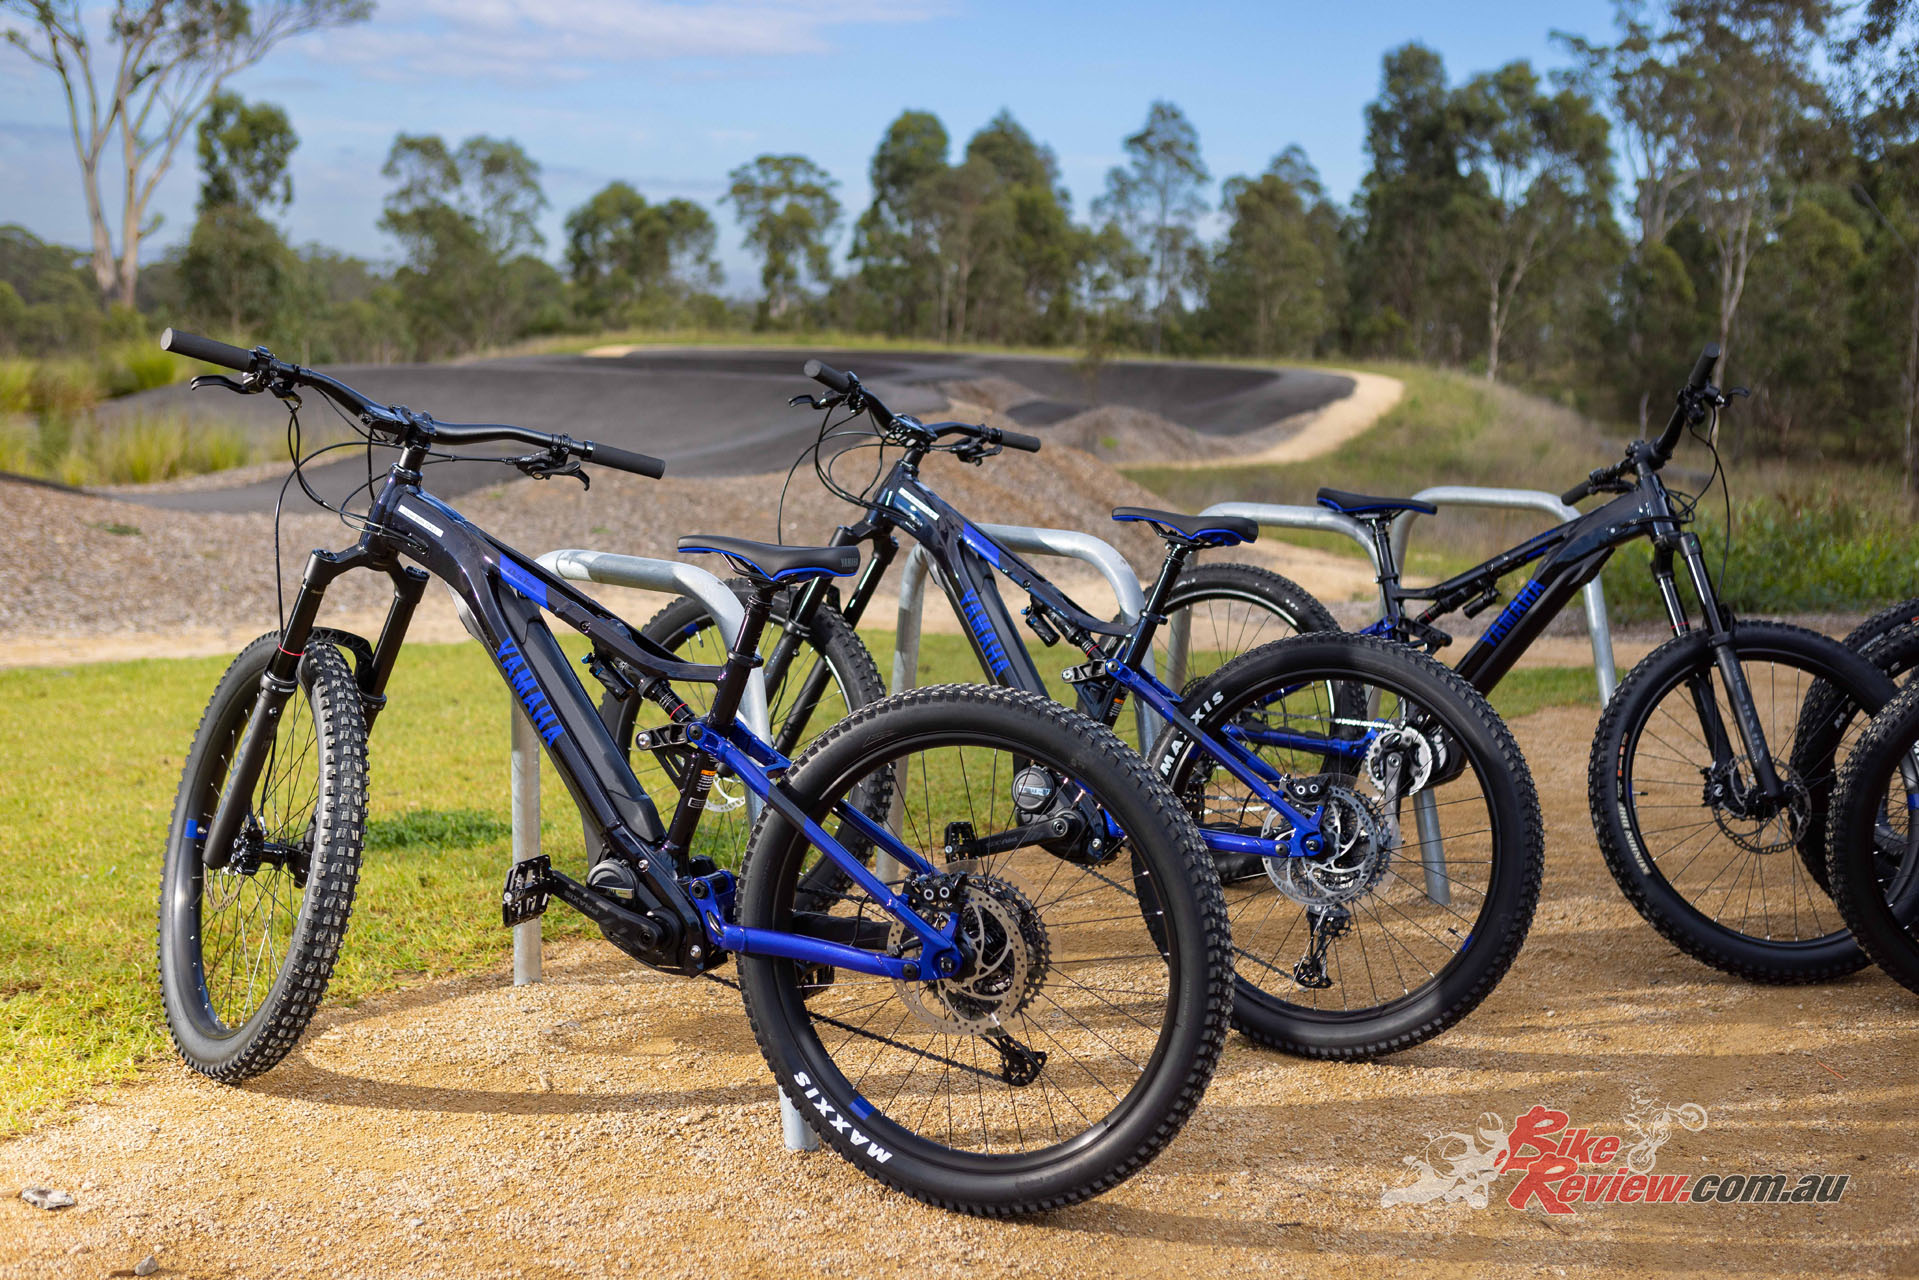 The frame design is where the YDX Moro 07 really sets itself apart from other e-mountain bikes of a similar class. It's been developed using chassis inspired by Yamaha's MX motorcycles featuring twin top & down tubes.